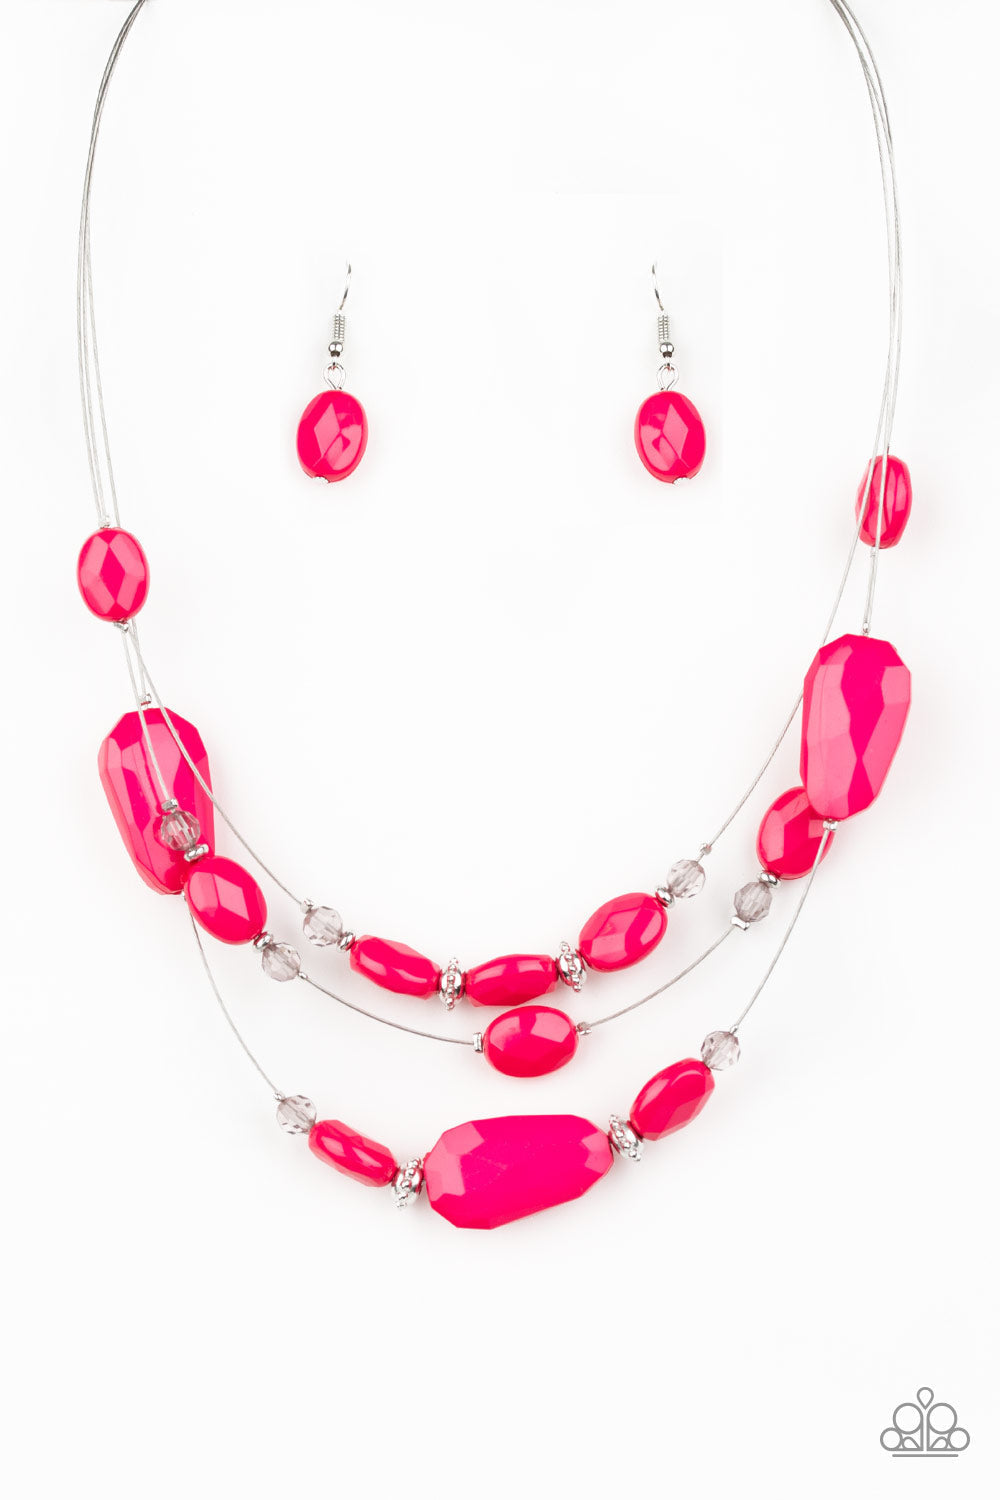 Radiant Reflections - Pink Necklace - Paparazzi Accessories - Infused with dainty metallic accents, a collection of faceted pink and sparkling crystal-like beads are threaded along invisible wires below the collar for a whimsically layered stylish fashion necklace.